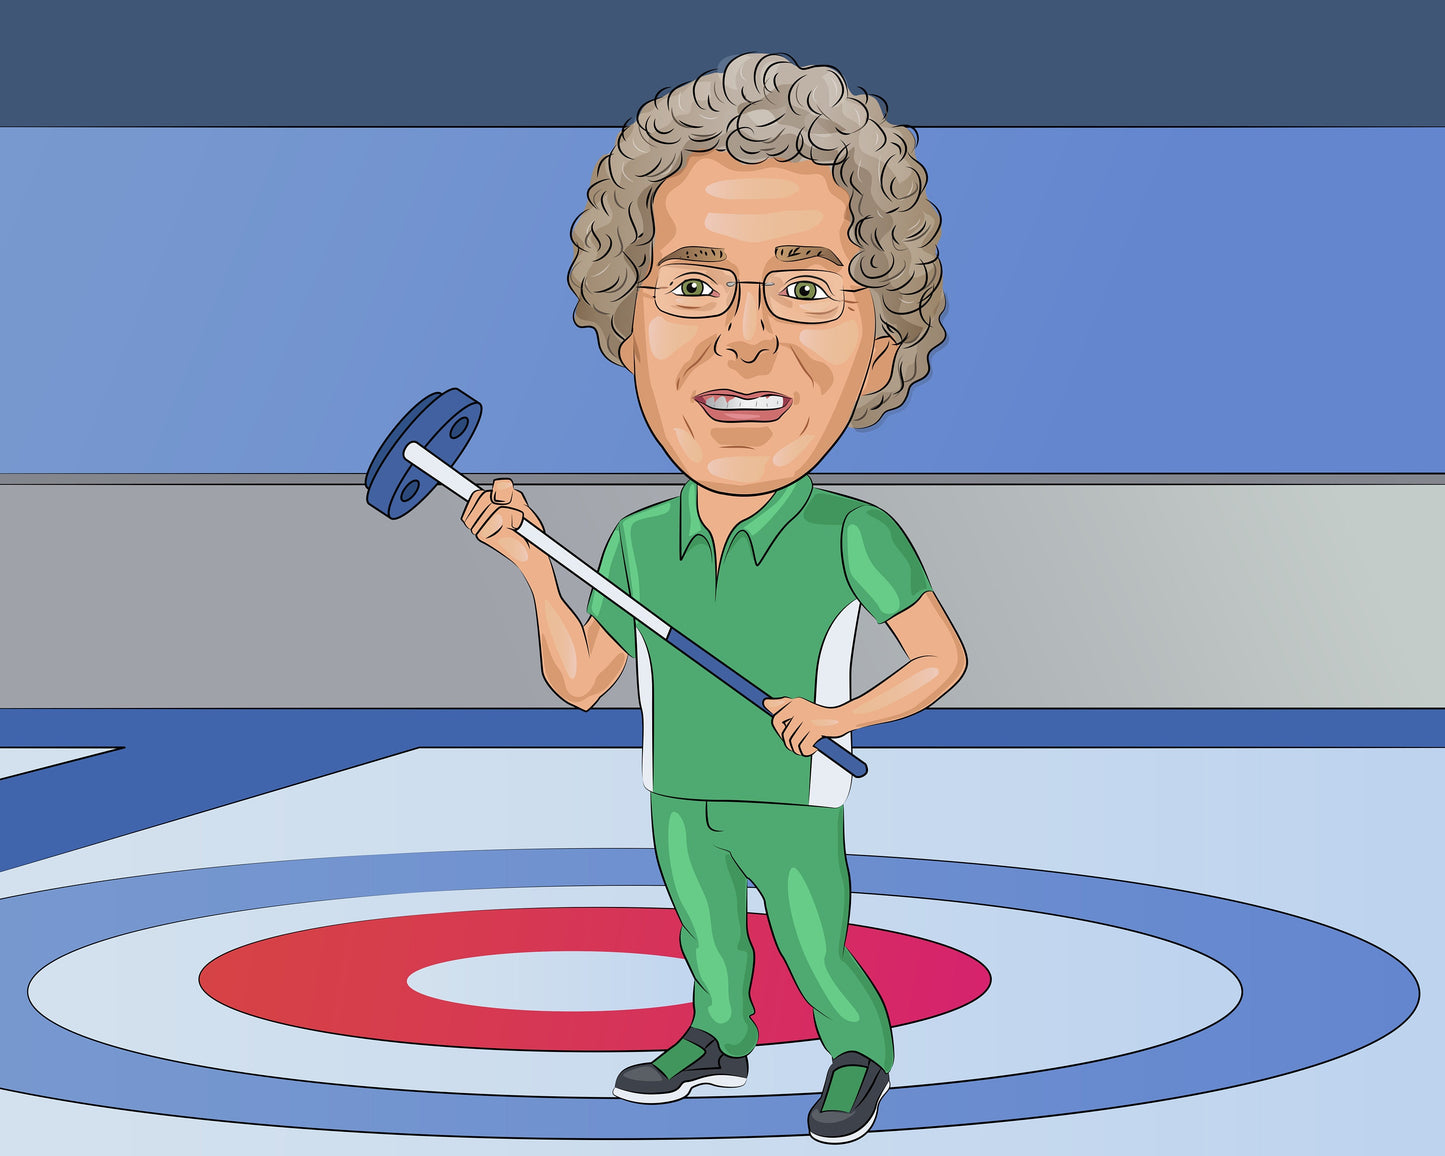 Curling Player Gift - Custom Caricature Portrait From Your Photo/curler gift/curling gift